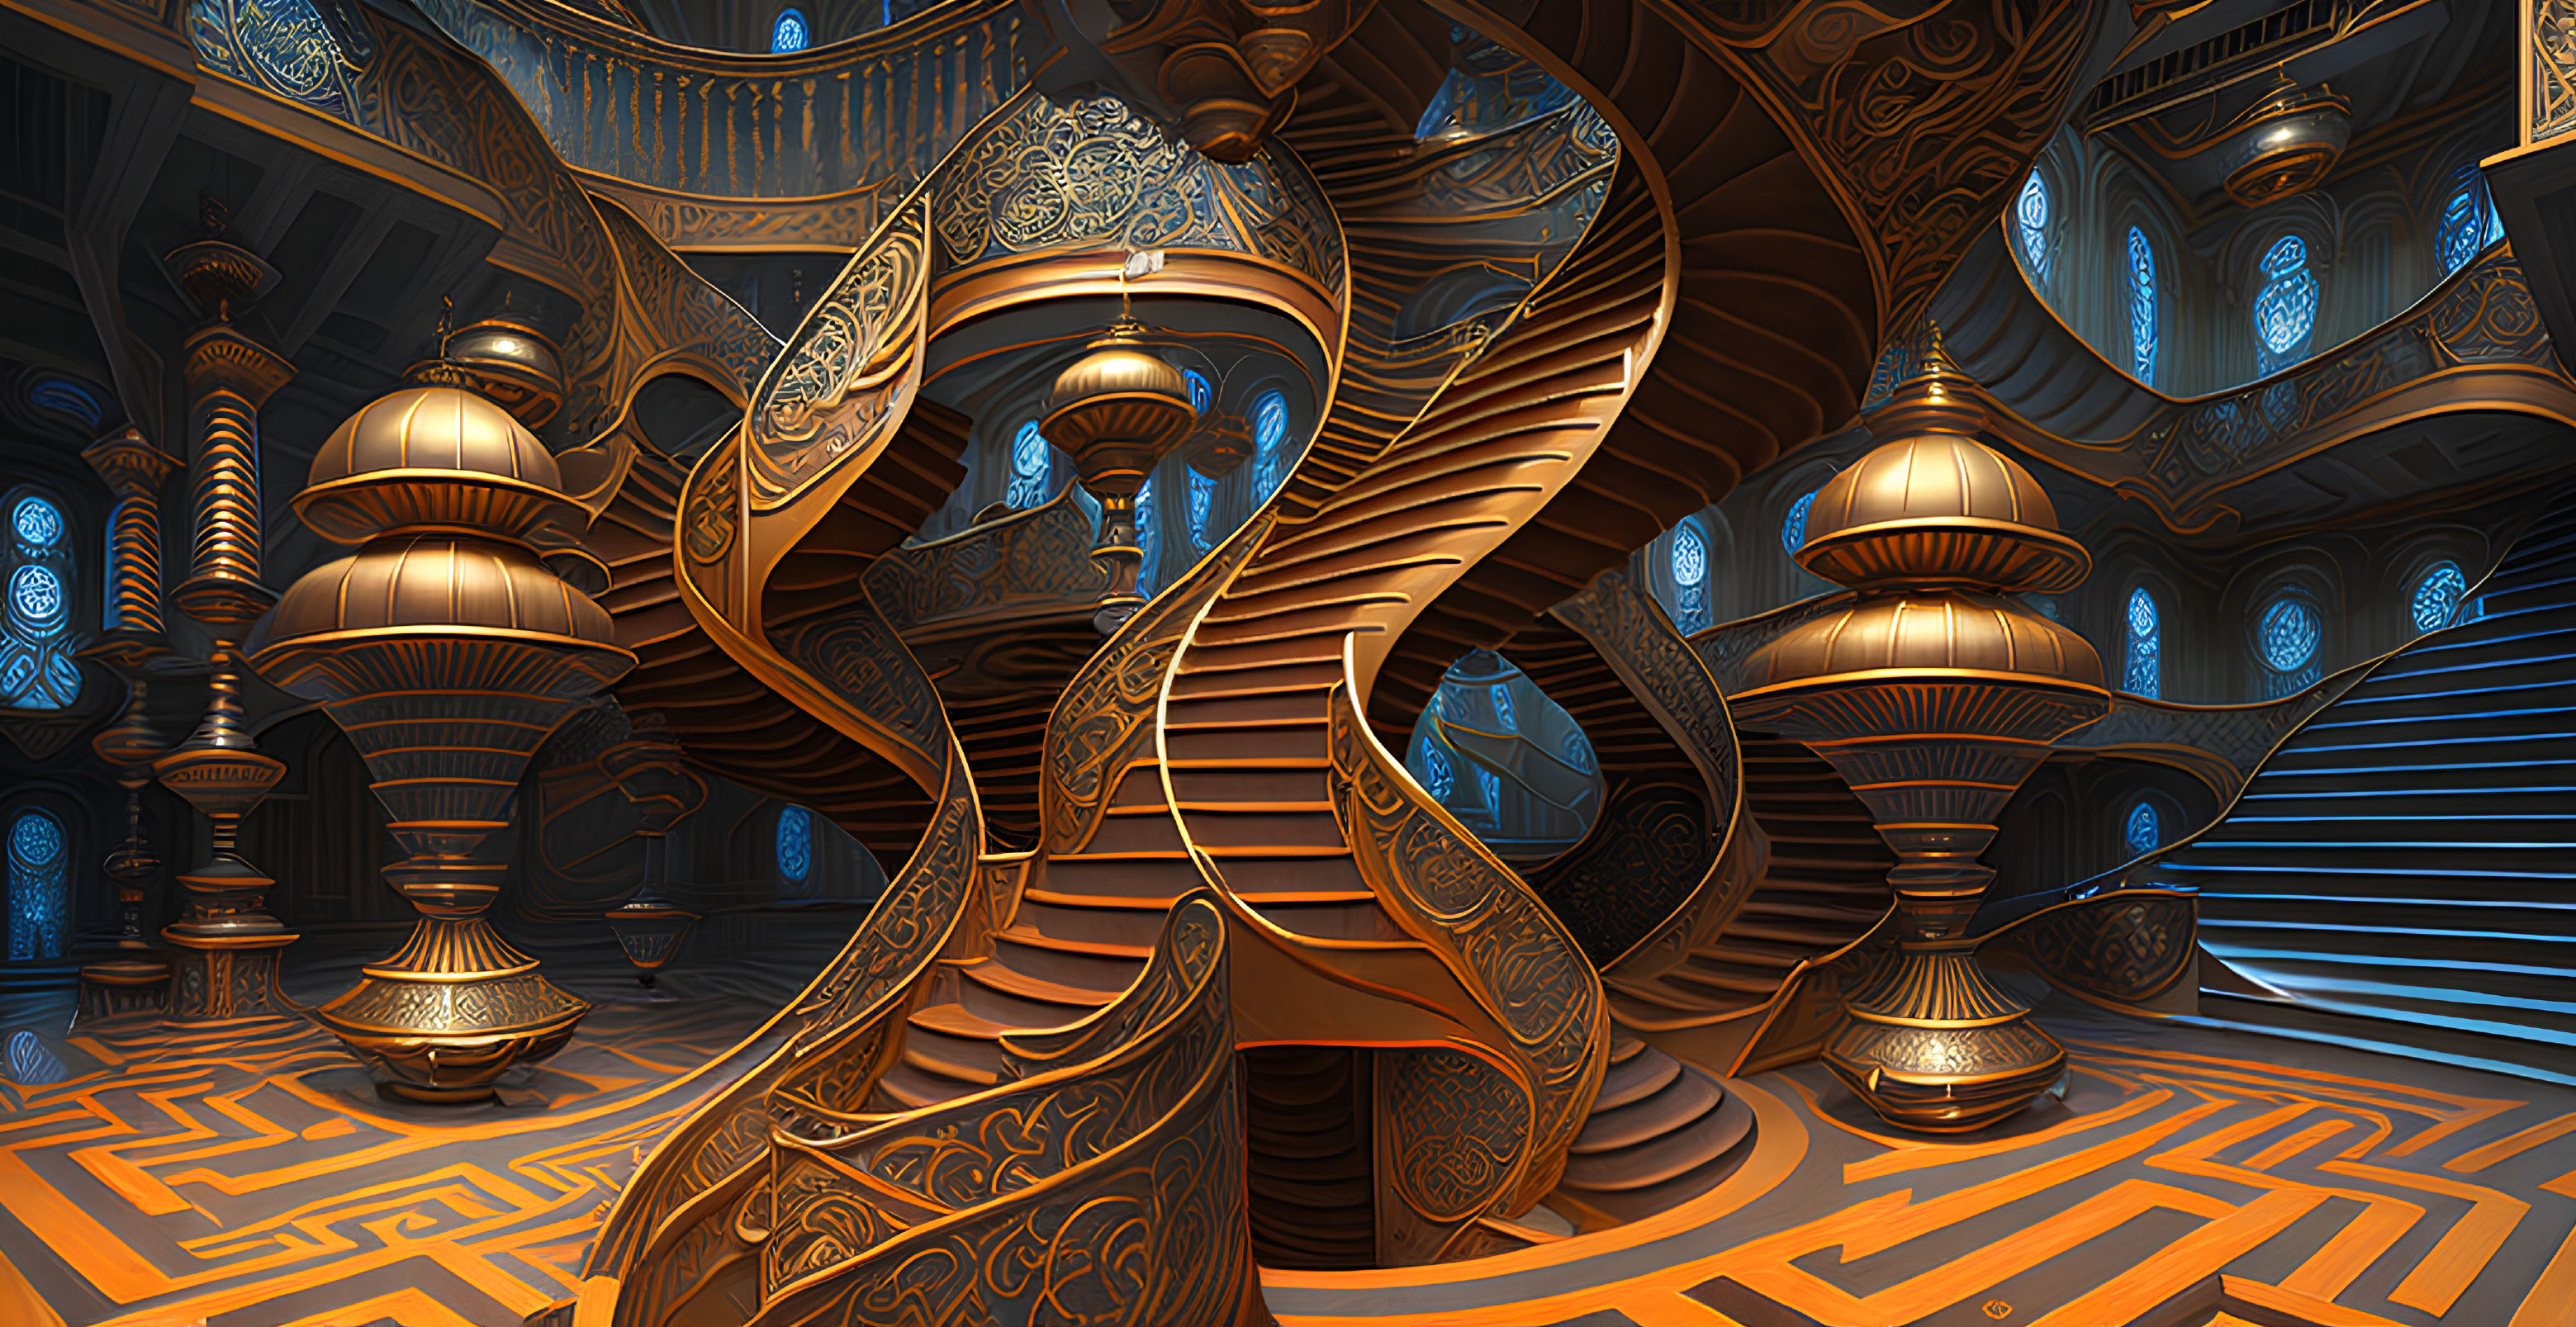 Intricate golden spiral staircases in fantastical interior